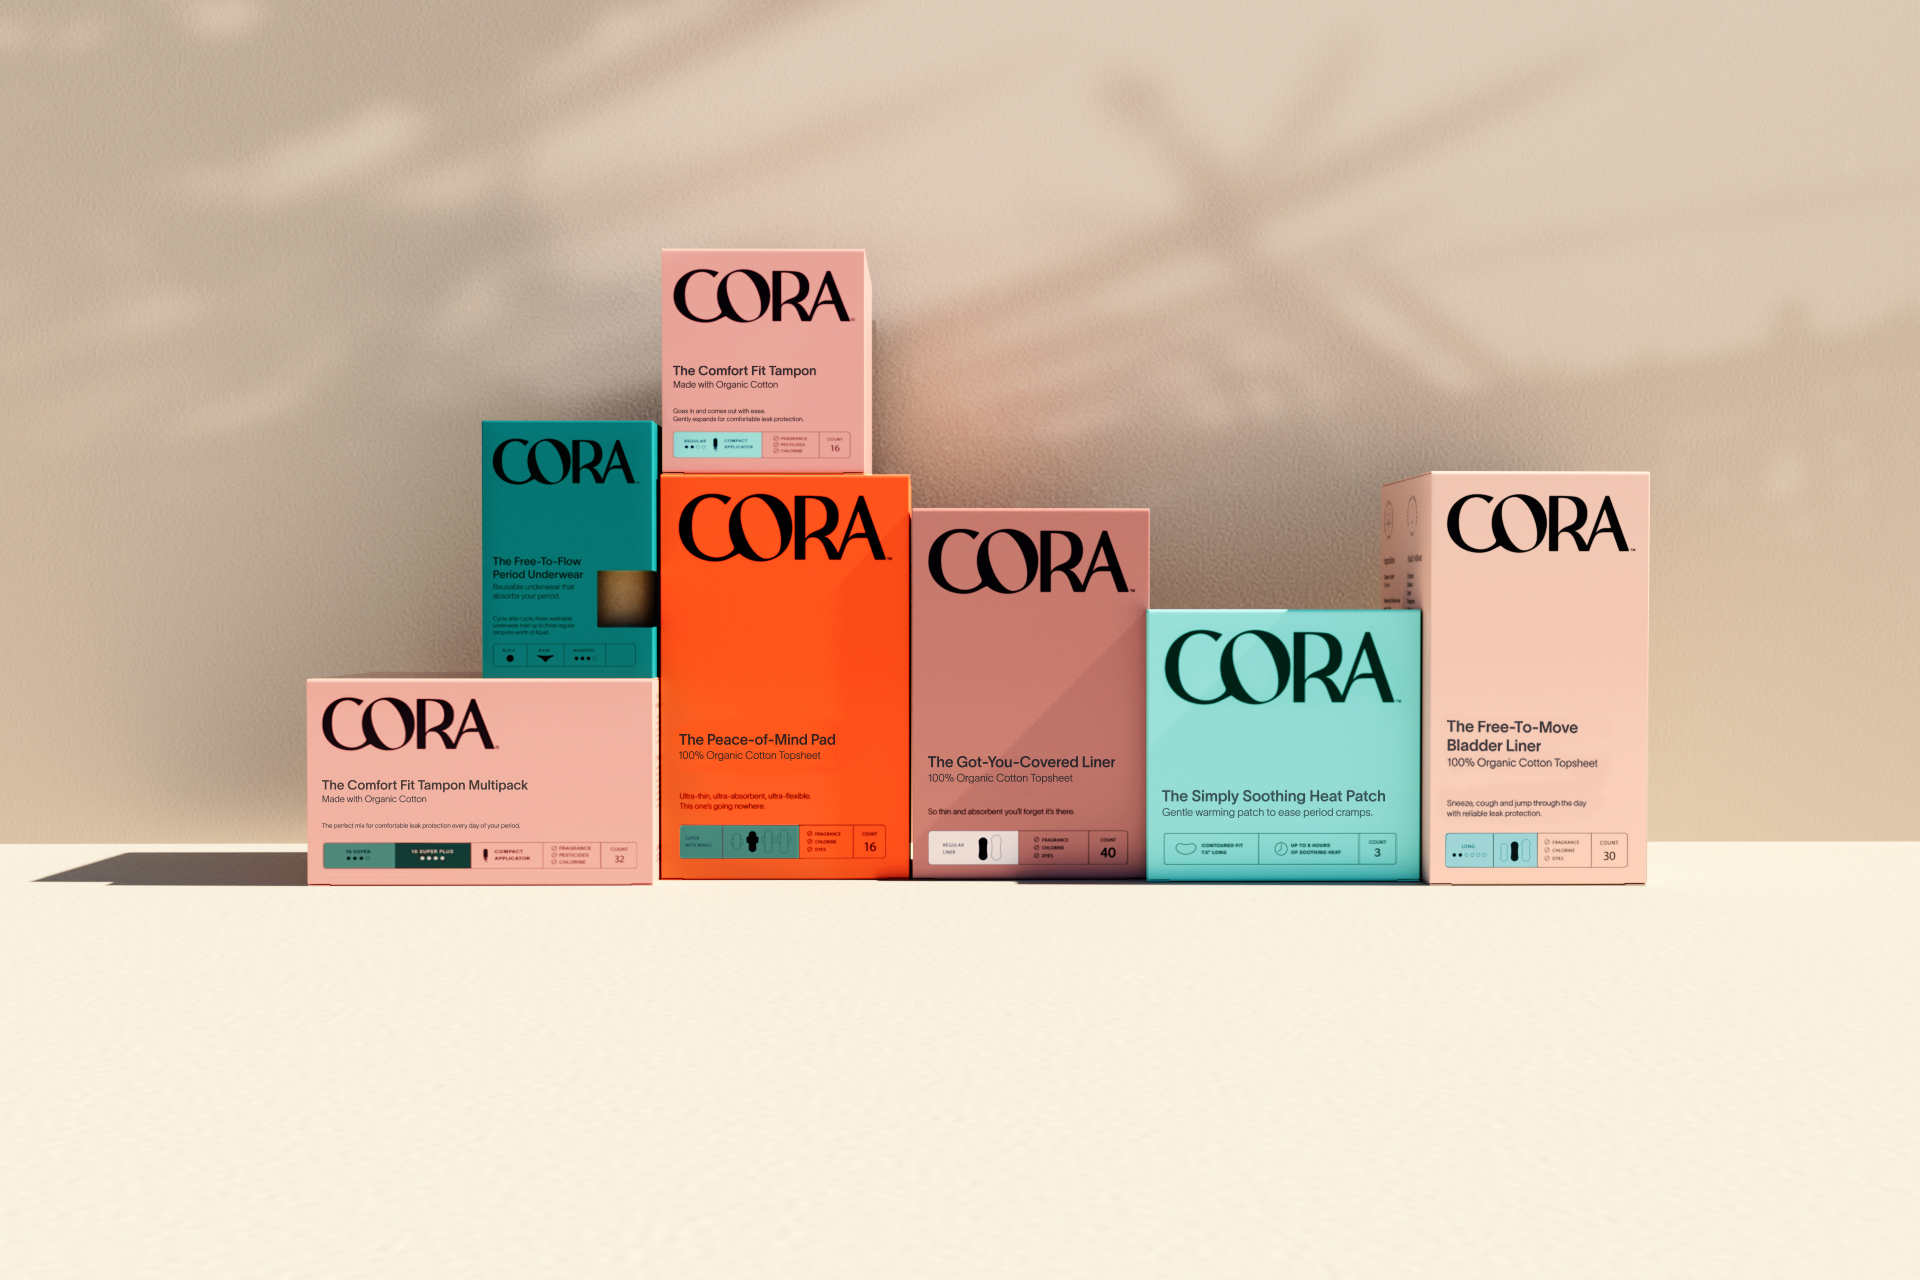 Wellness And Period Care Brand Cora Launches New Inclusive Identity Created By Mother Design